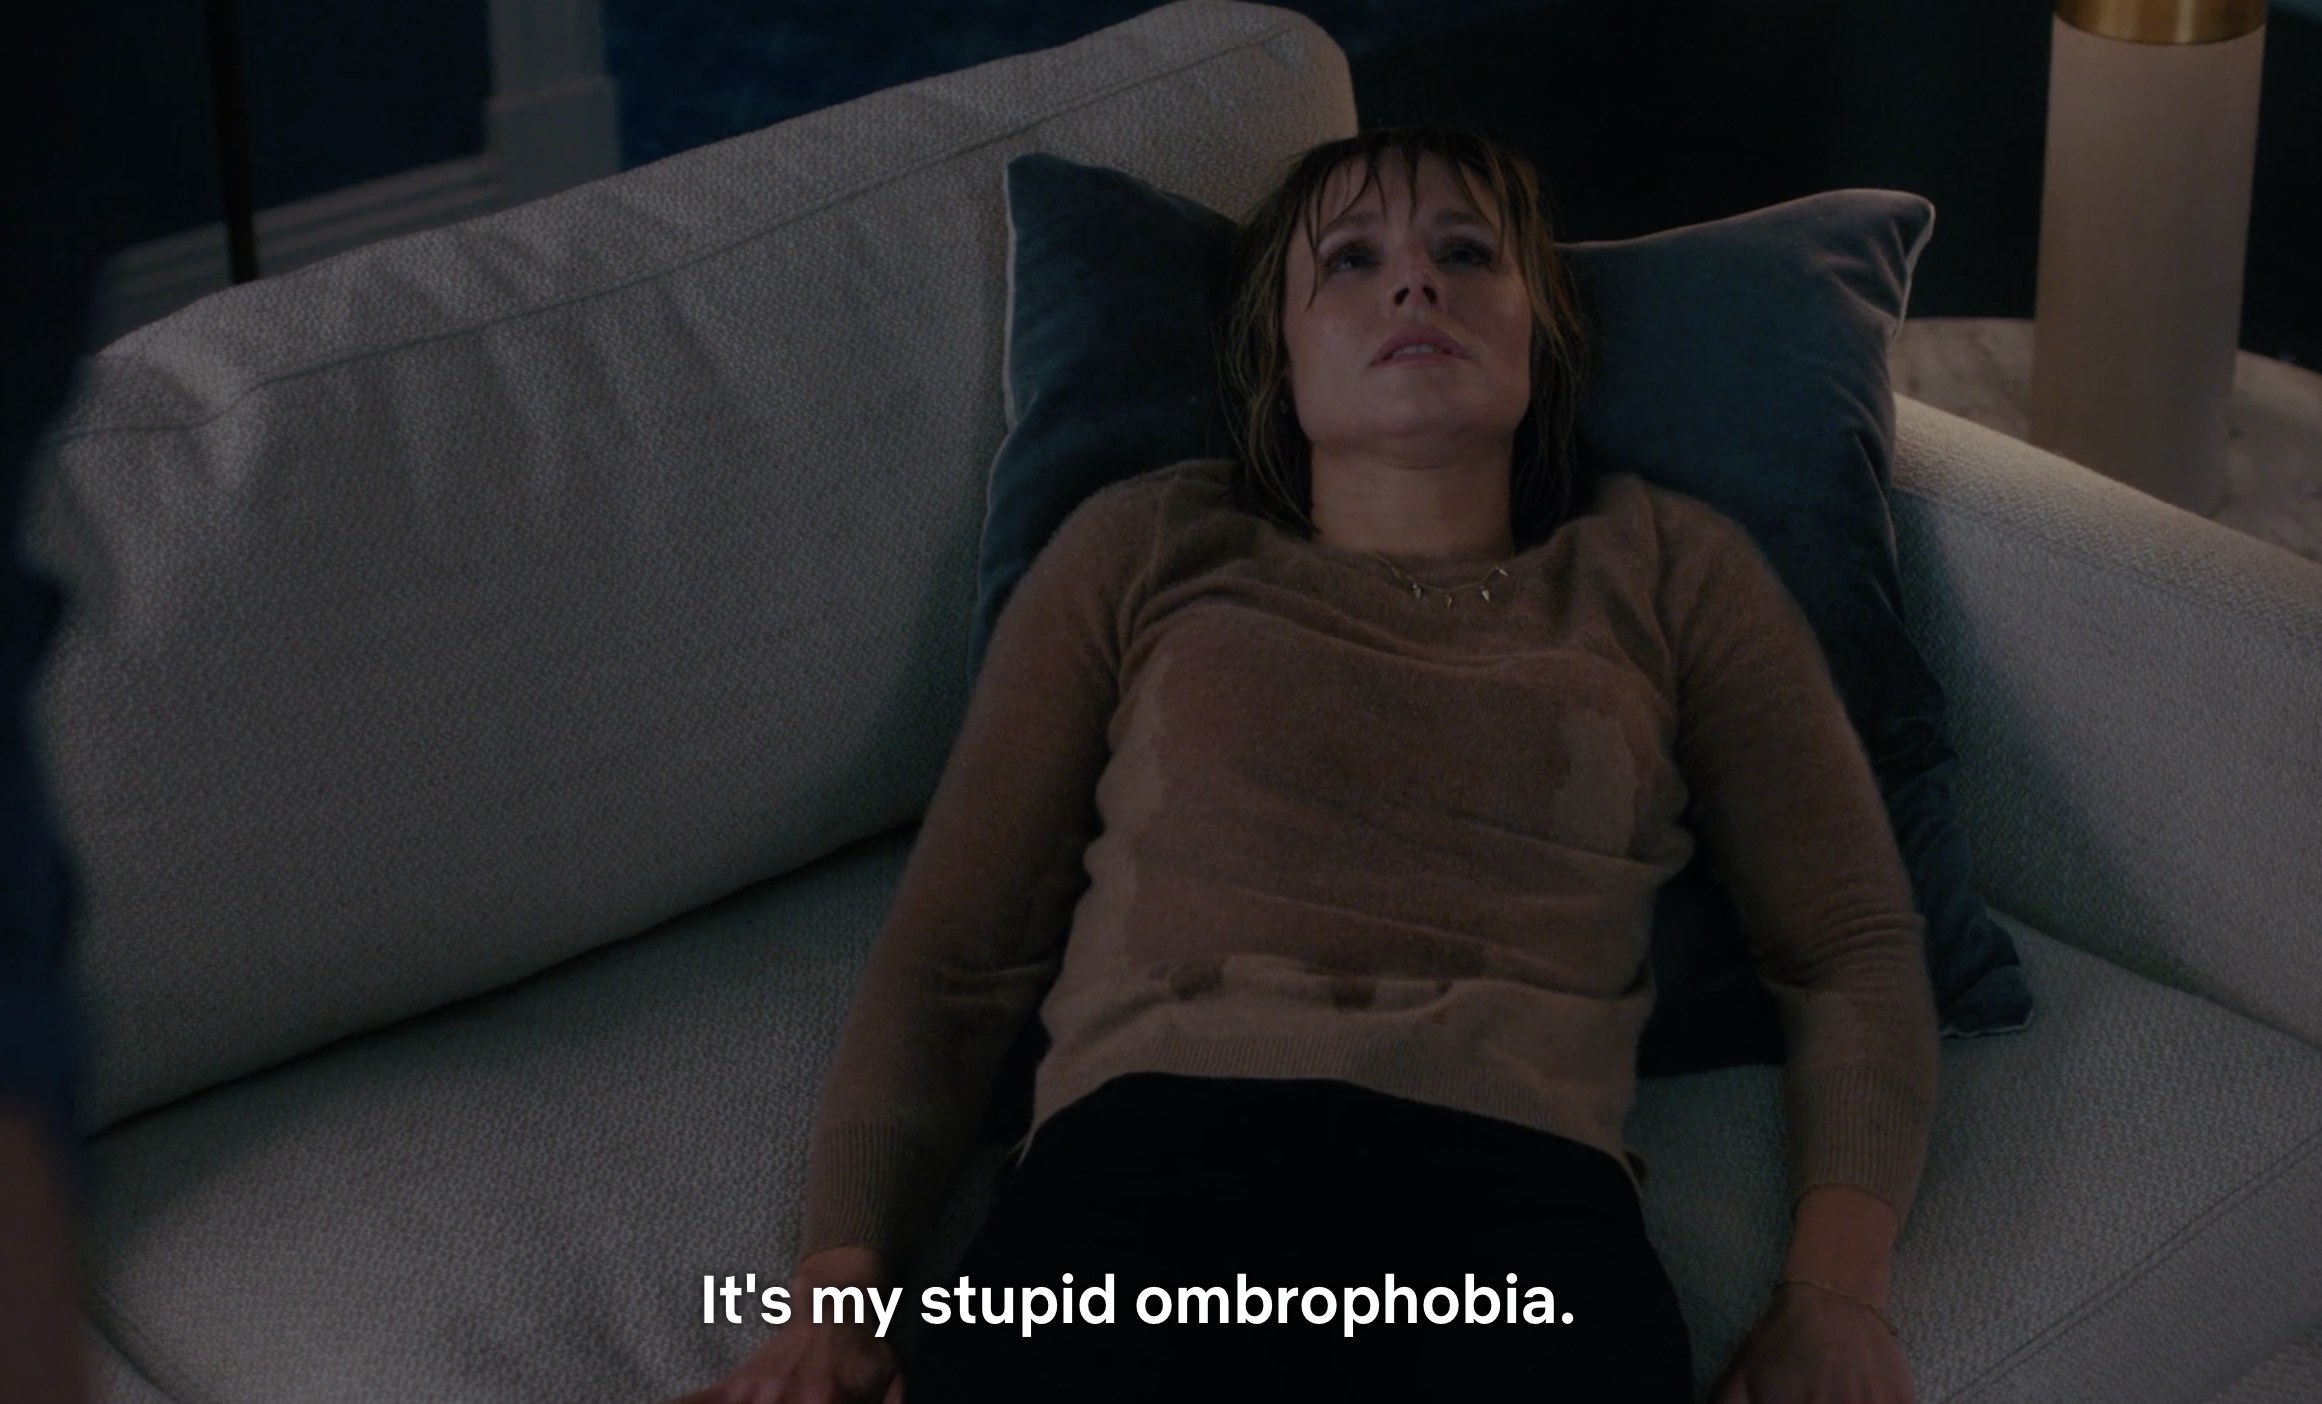 A drenched Kristen Bell laying on a couch complaining about her ombrophobia (fear of the rain)